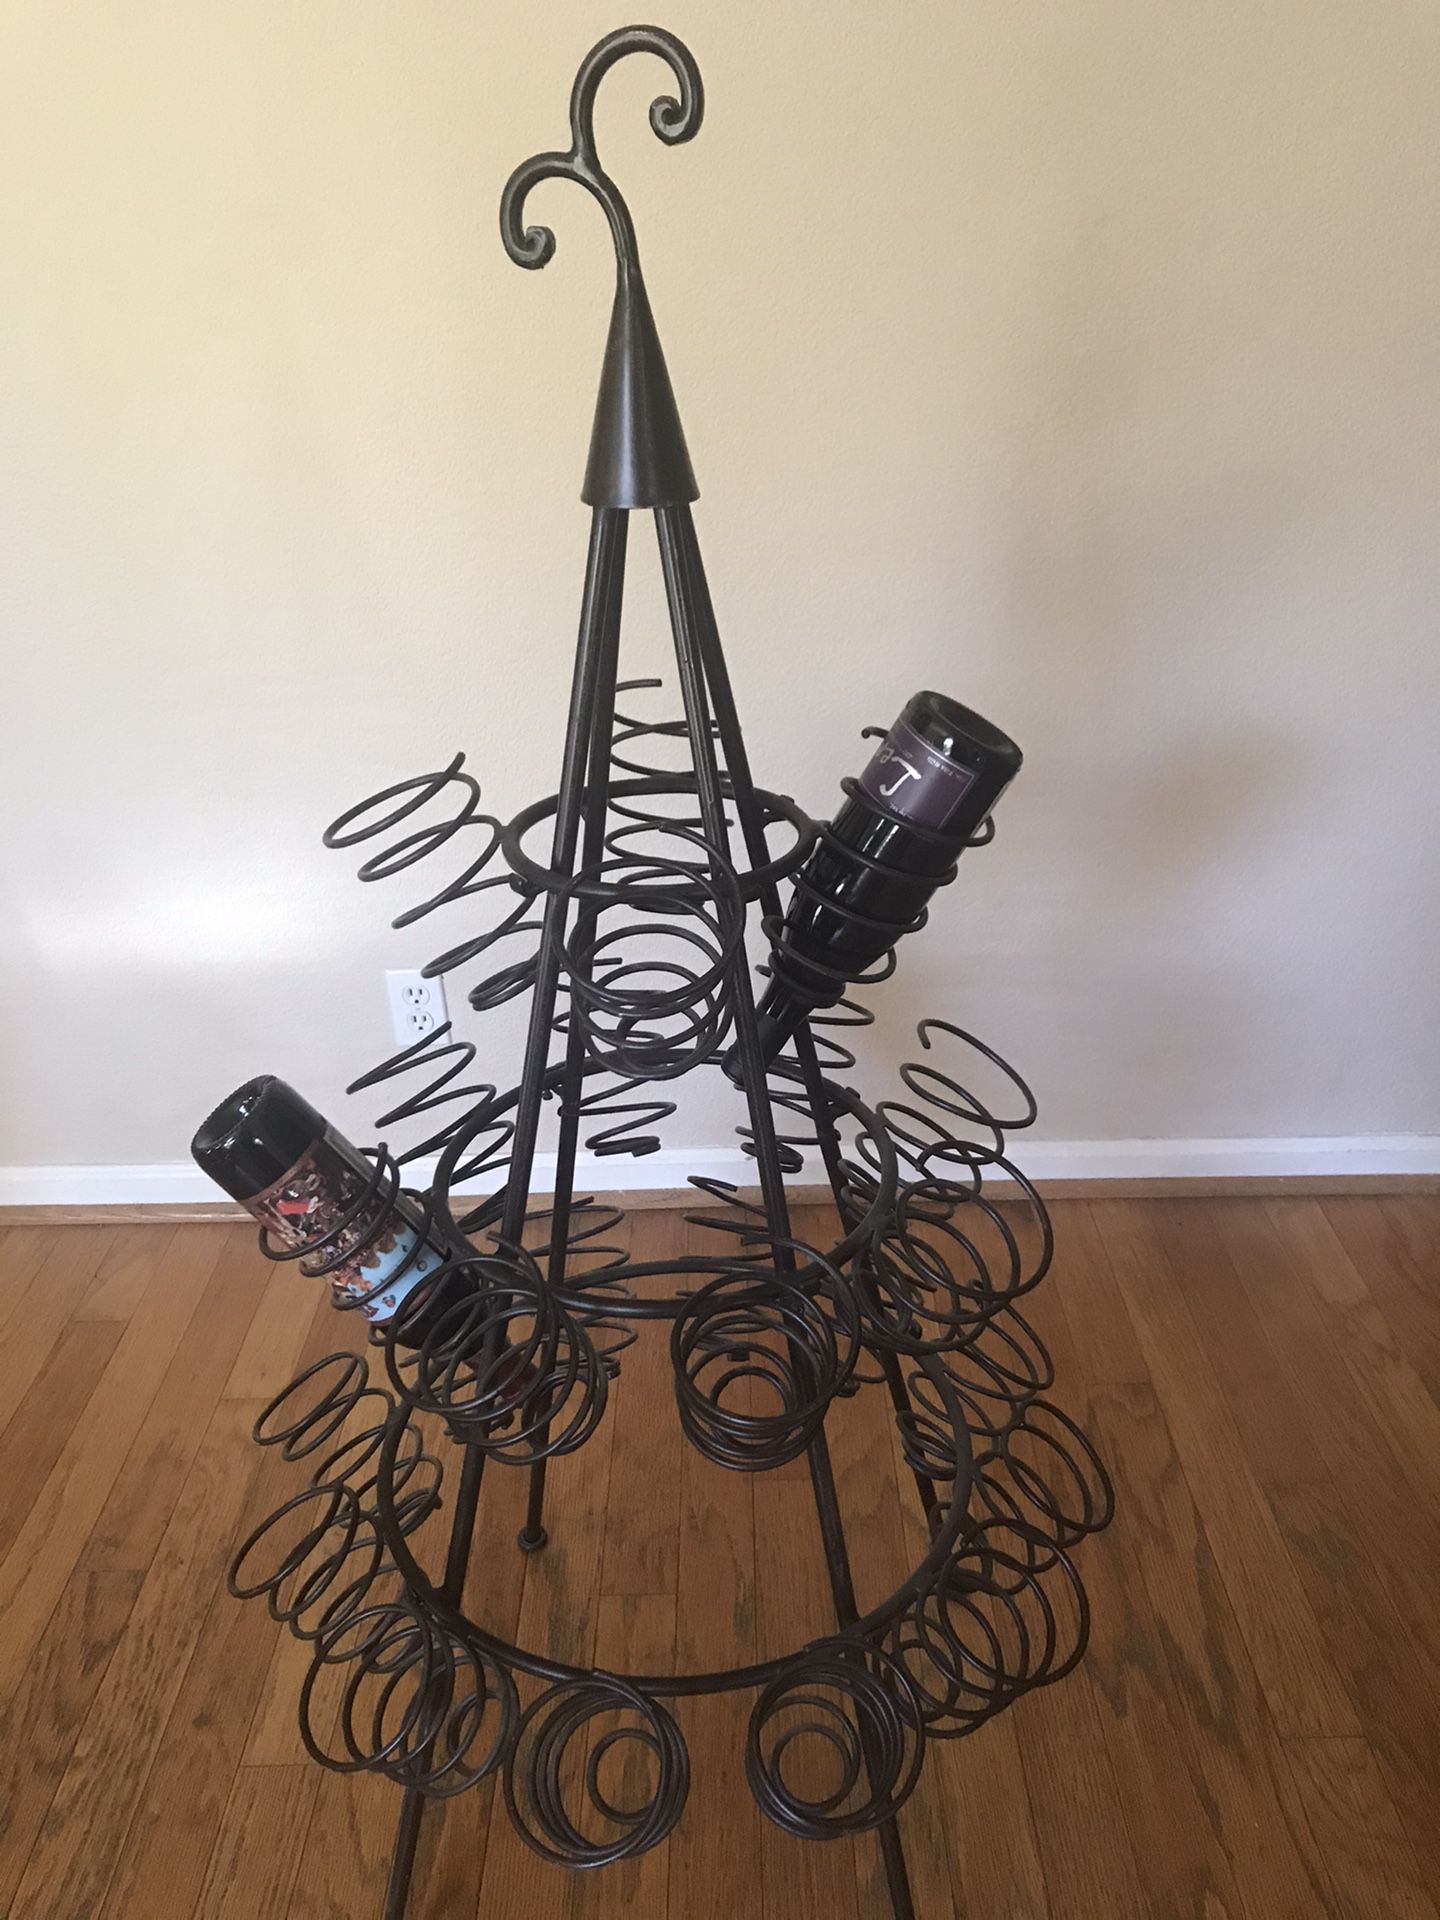 Rod iron wine rack from Pier One. Holds 24 bottles. Perfect Condition.